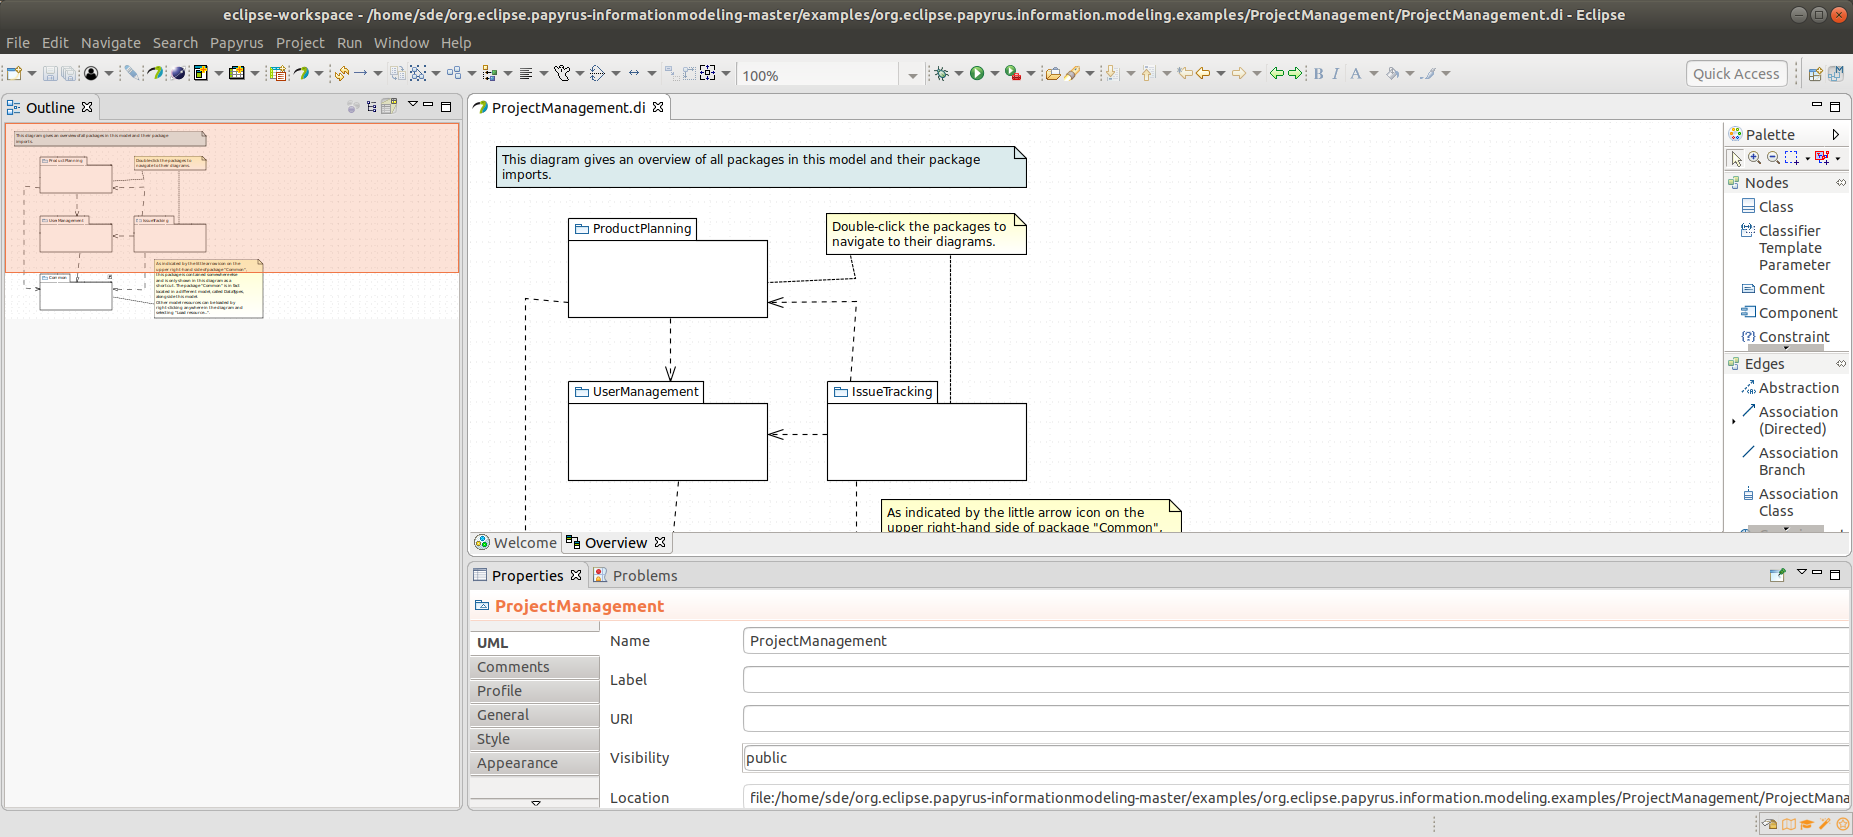 Eclipse Papyrus - Edit models based on UML and related ...